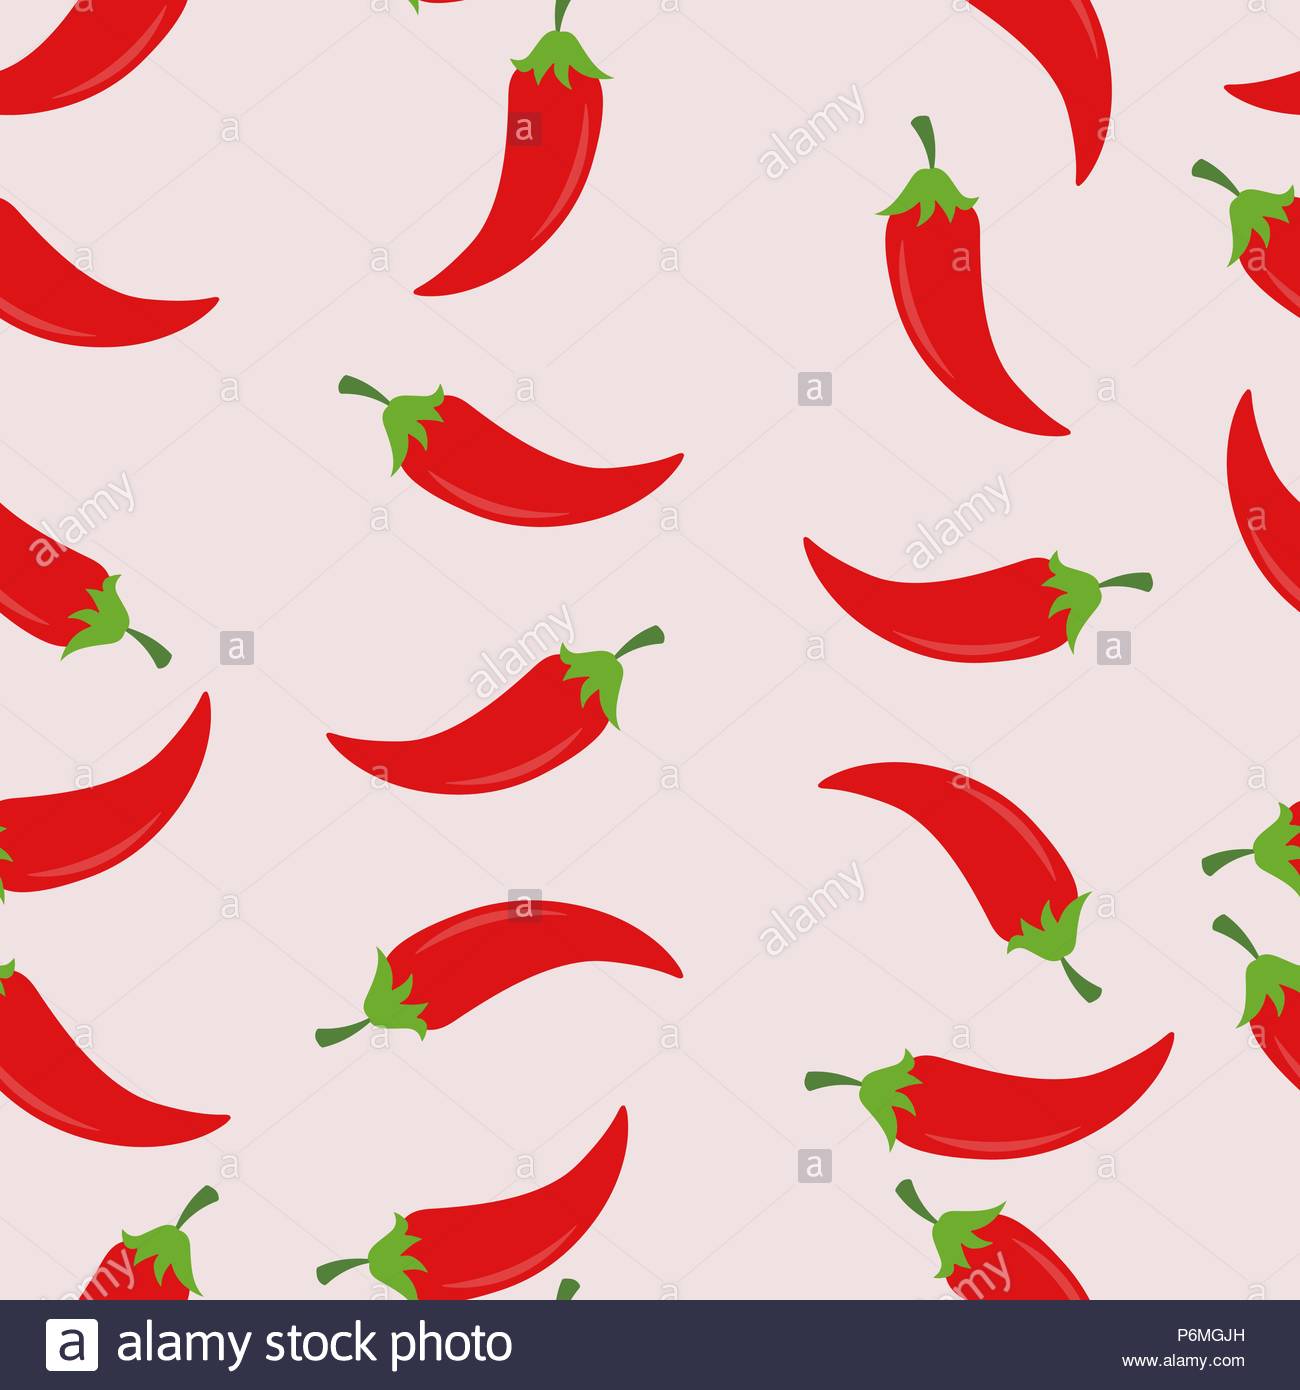 Red Chili Pepper Pattern Seamless Vector Illustration Food